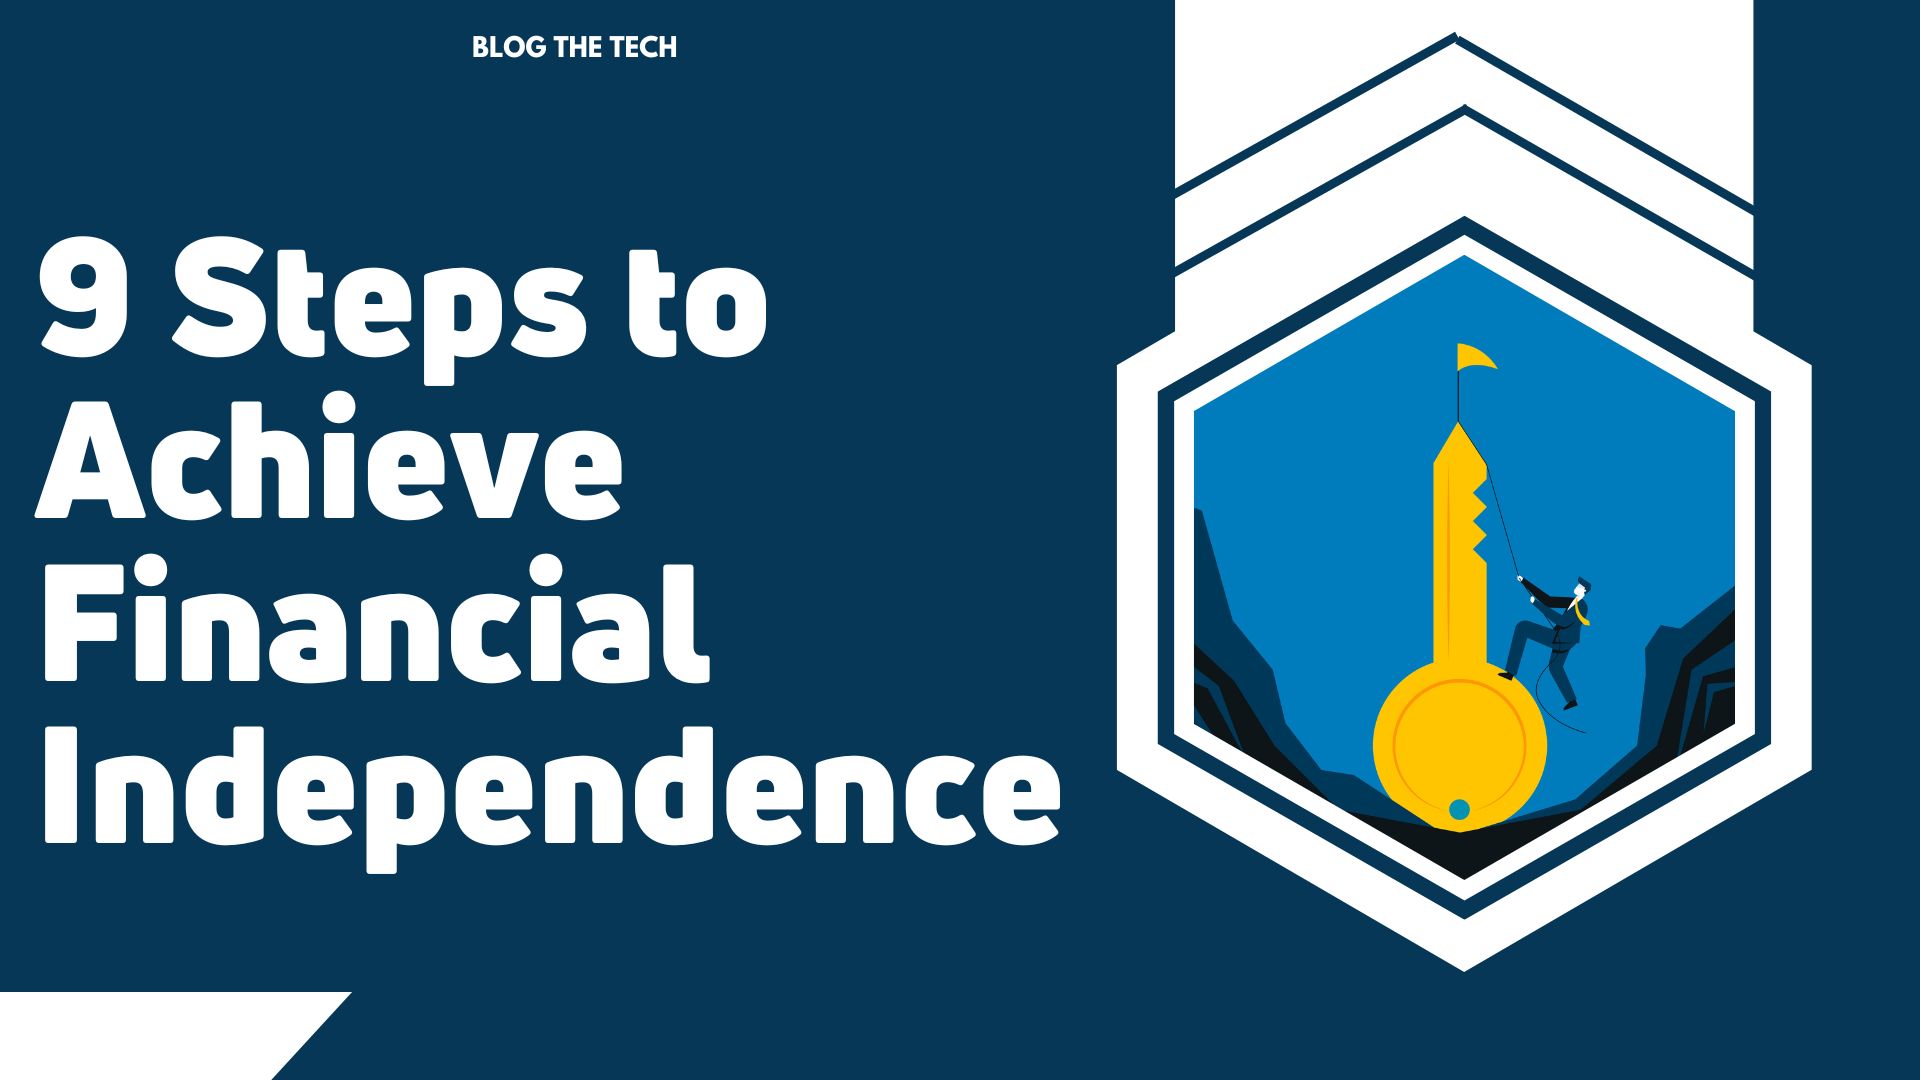 9 Steps to Achieve Financial Independence